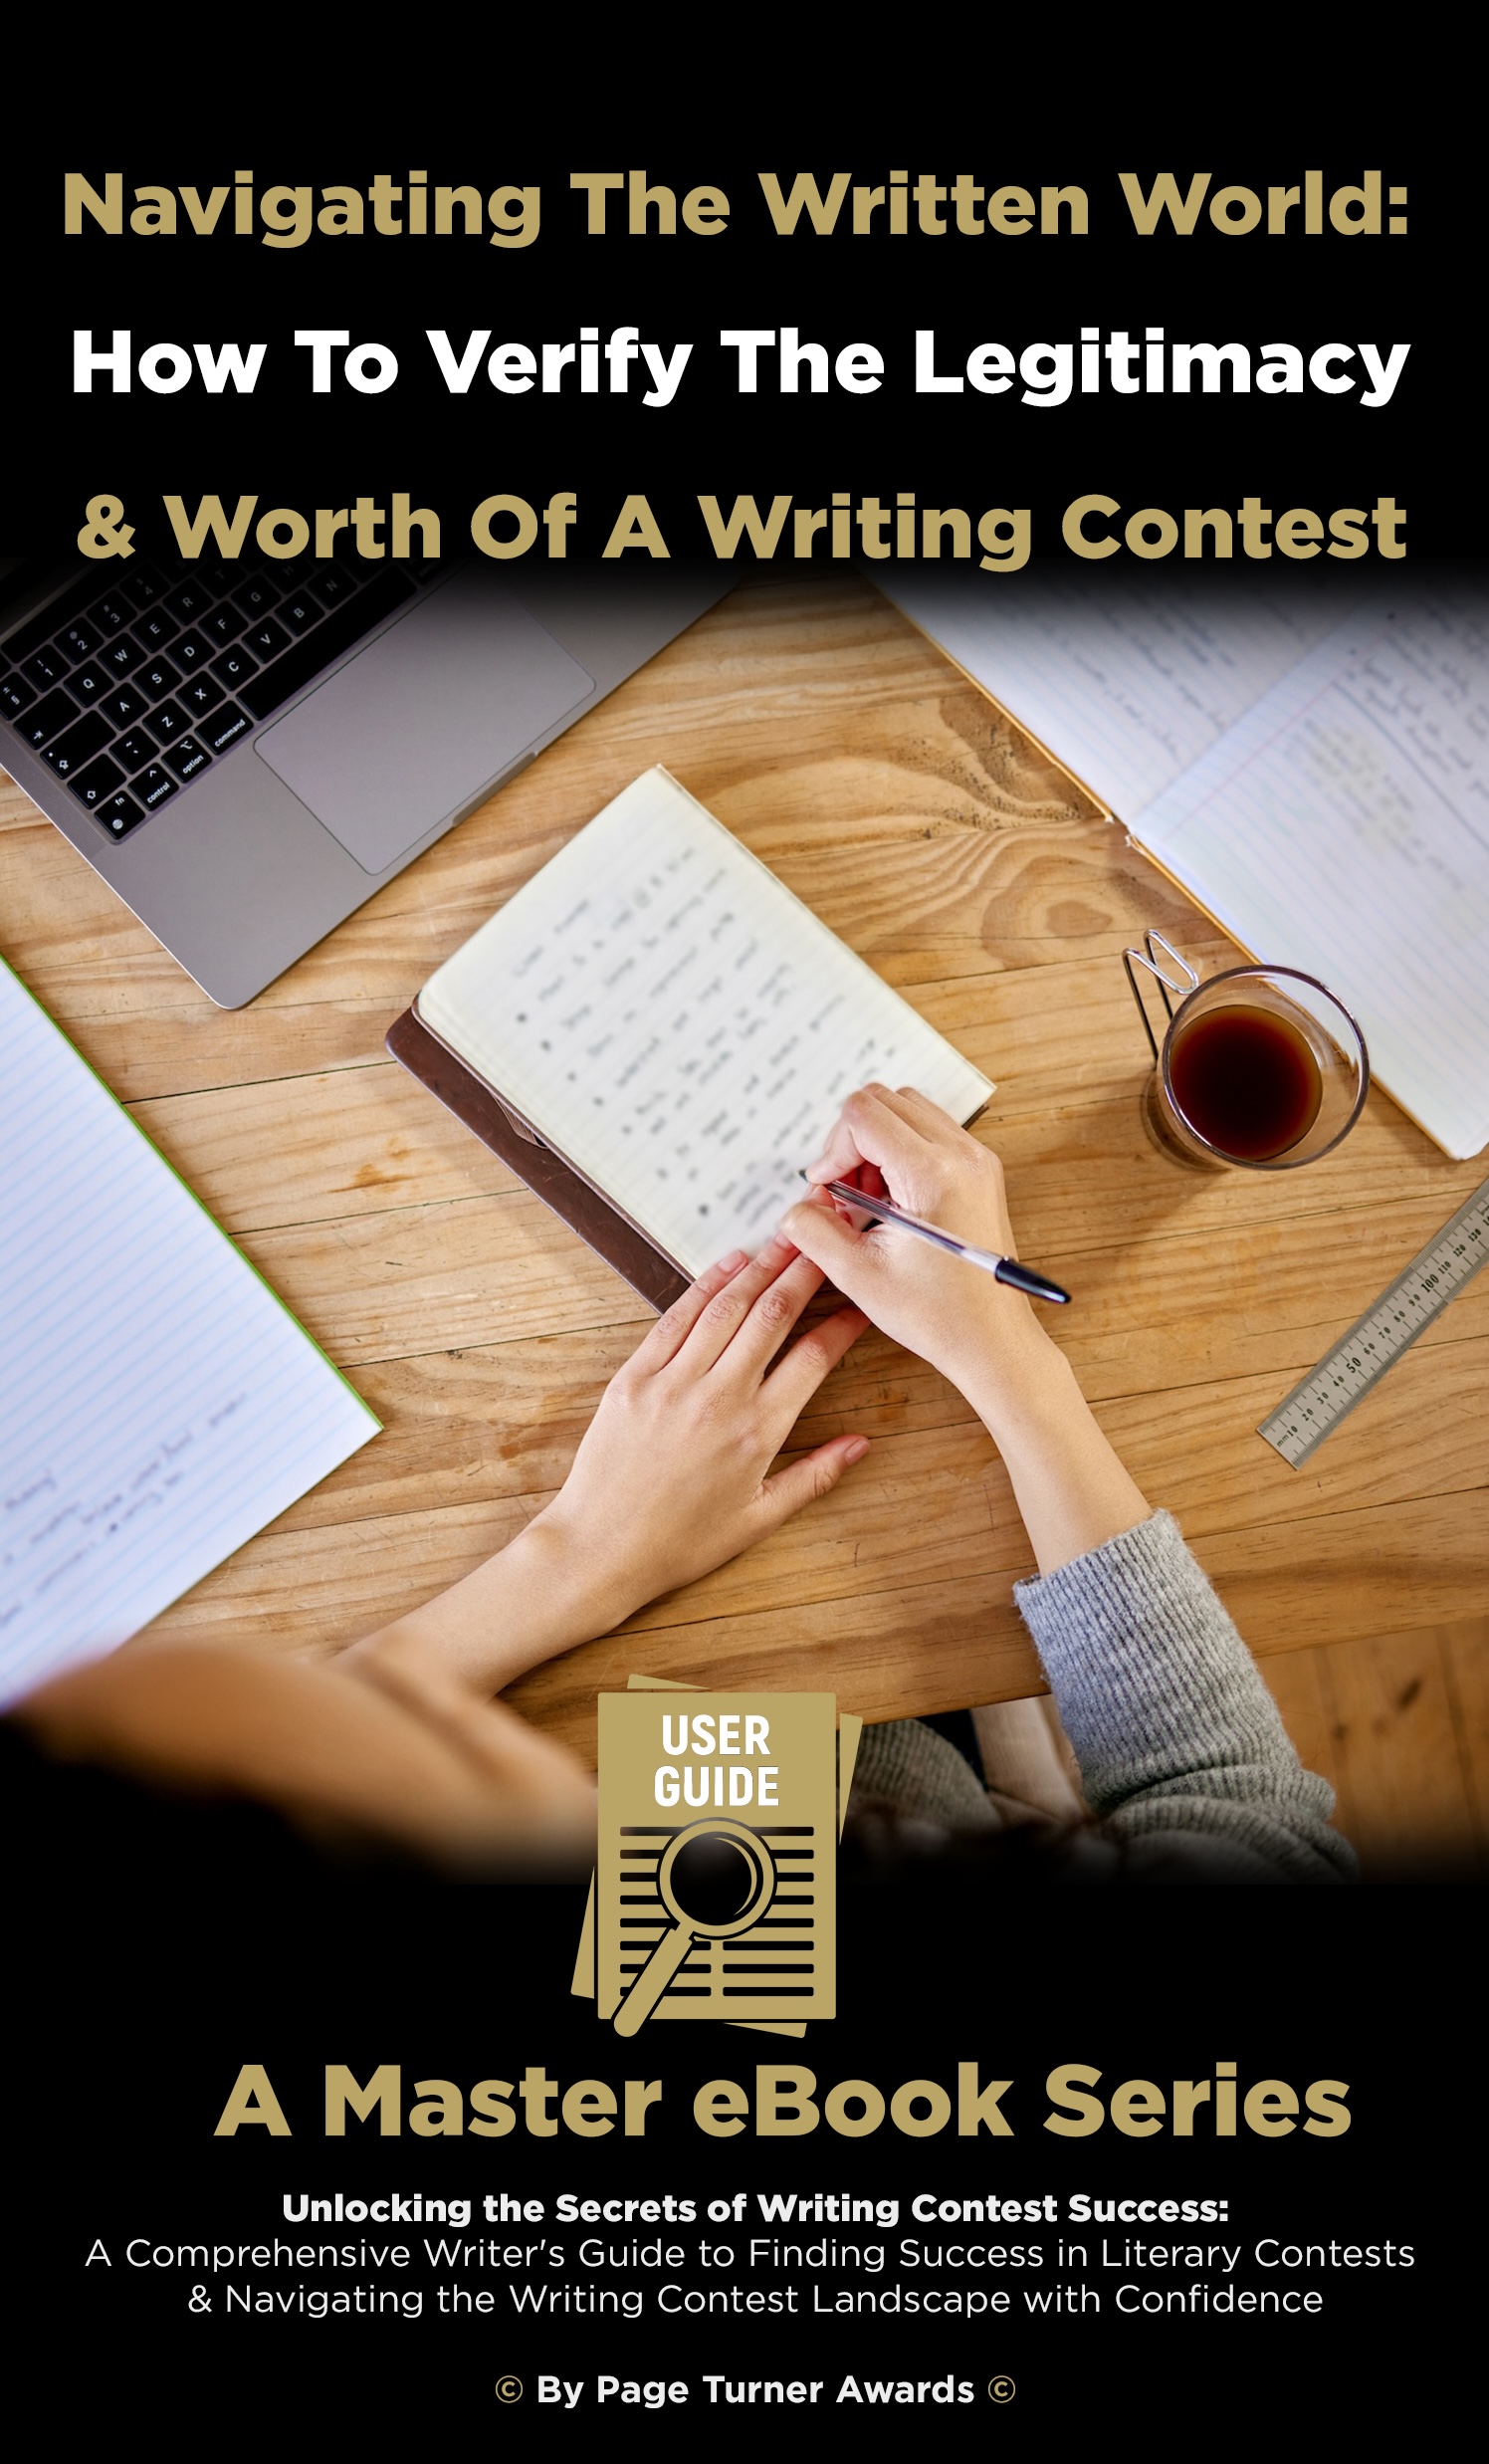 Navigating The Written World: How To Verify The Legitimacy And Worth Of A Writing Contest